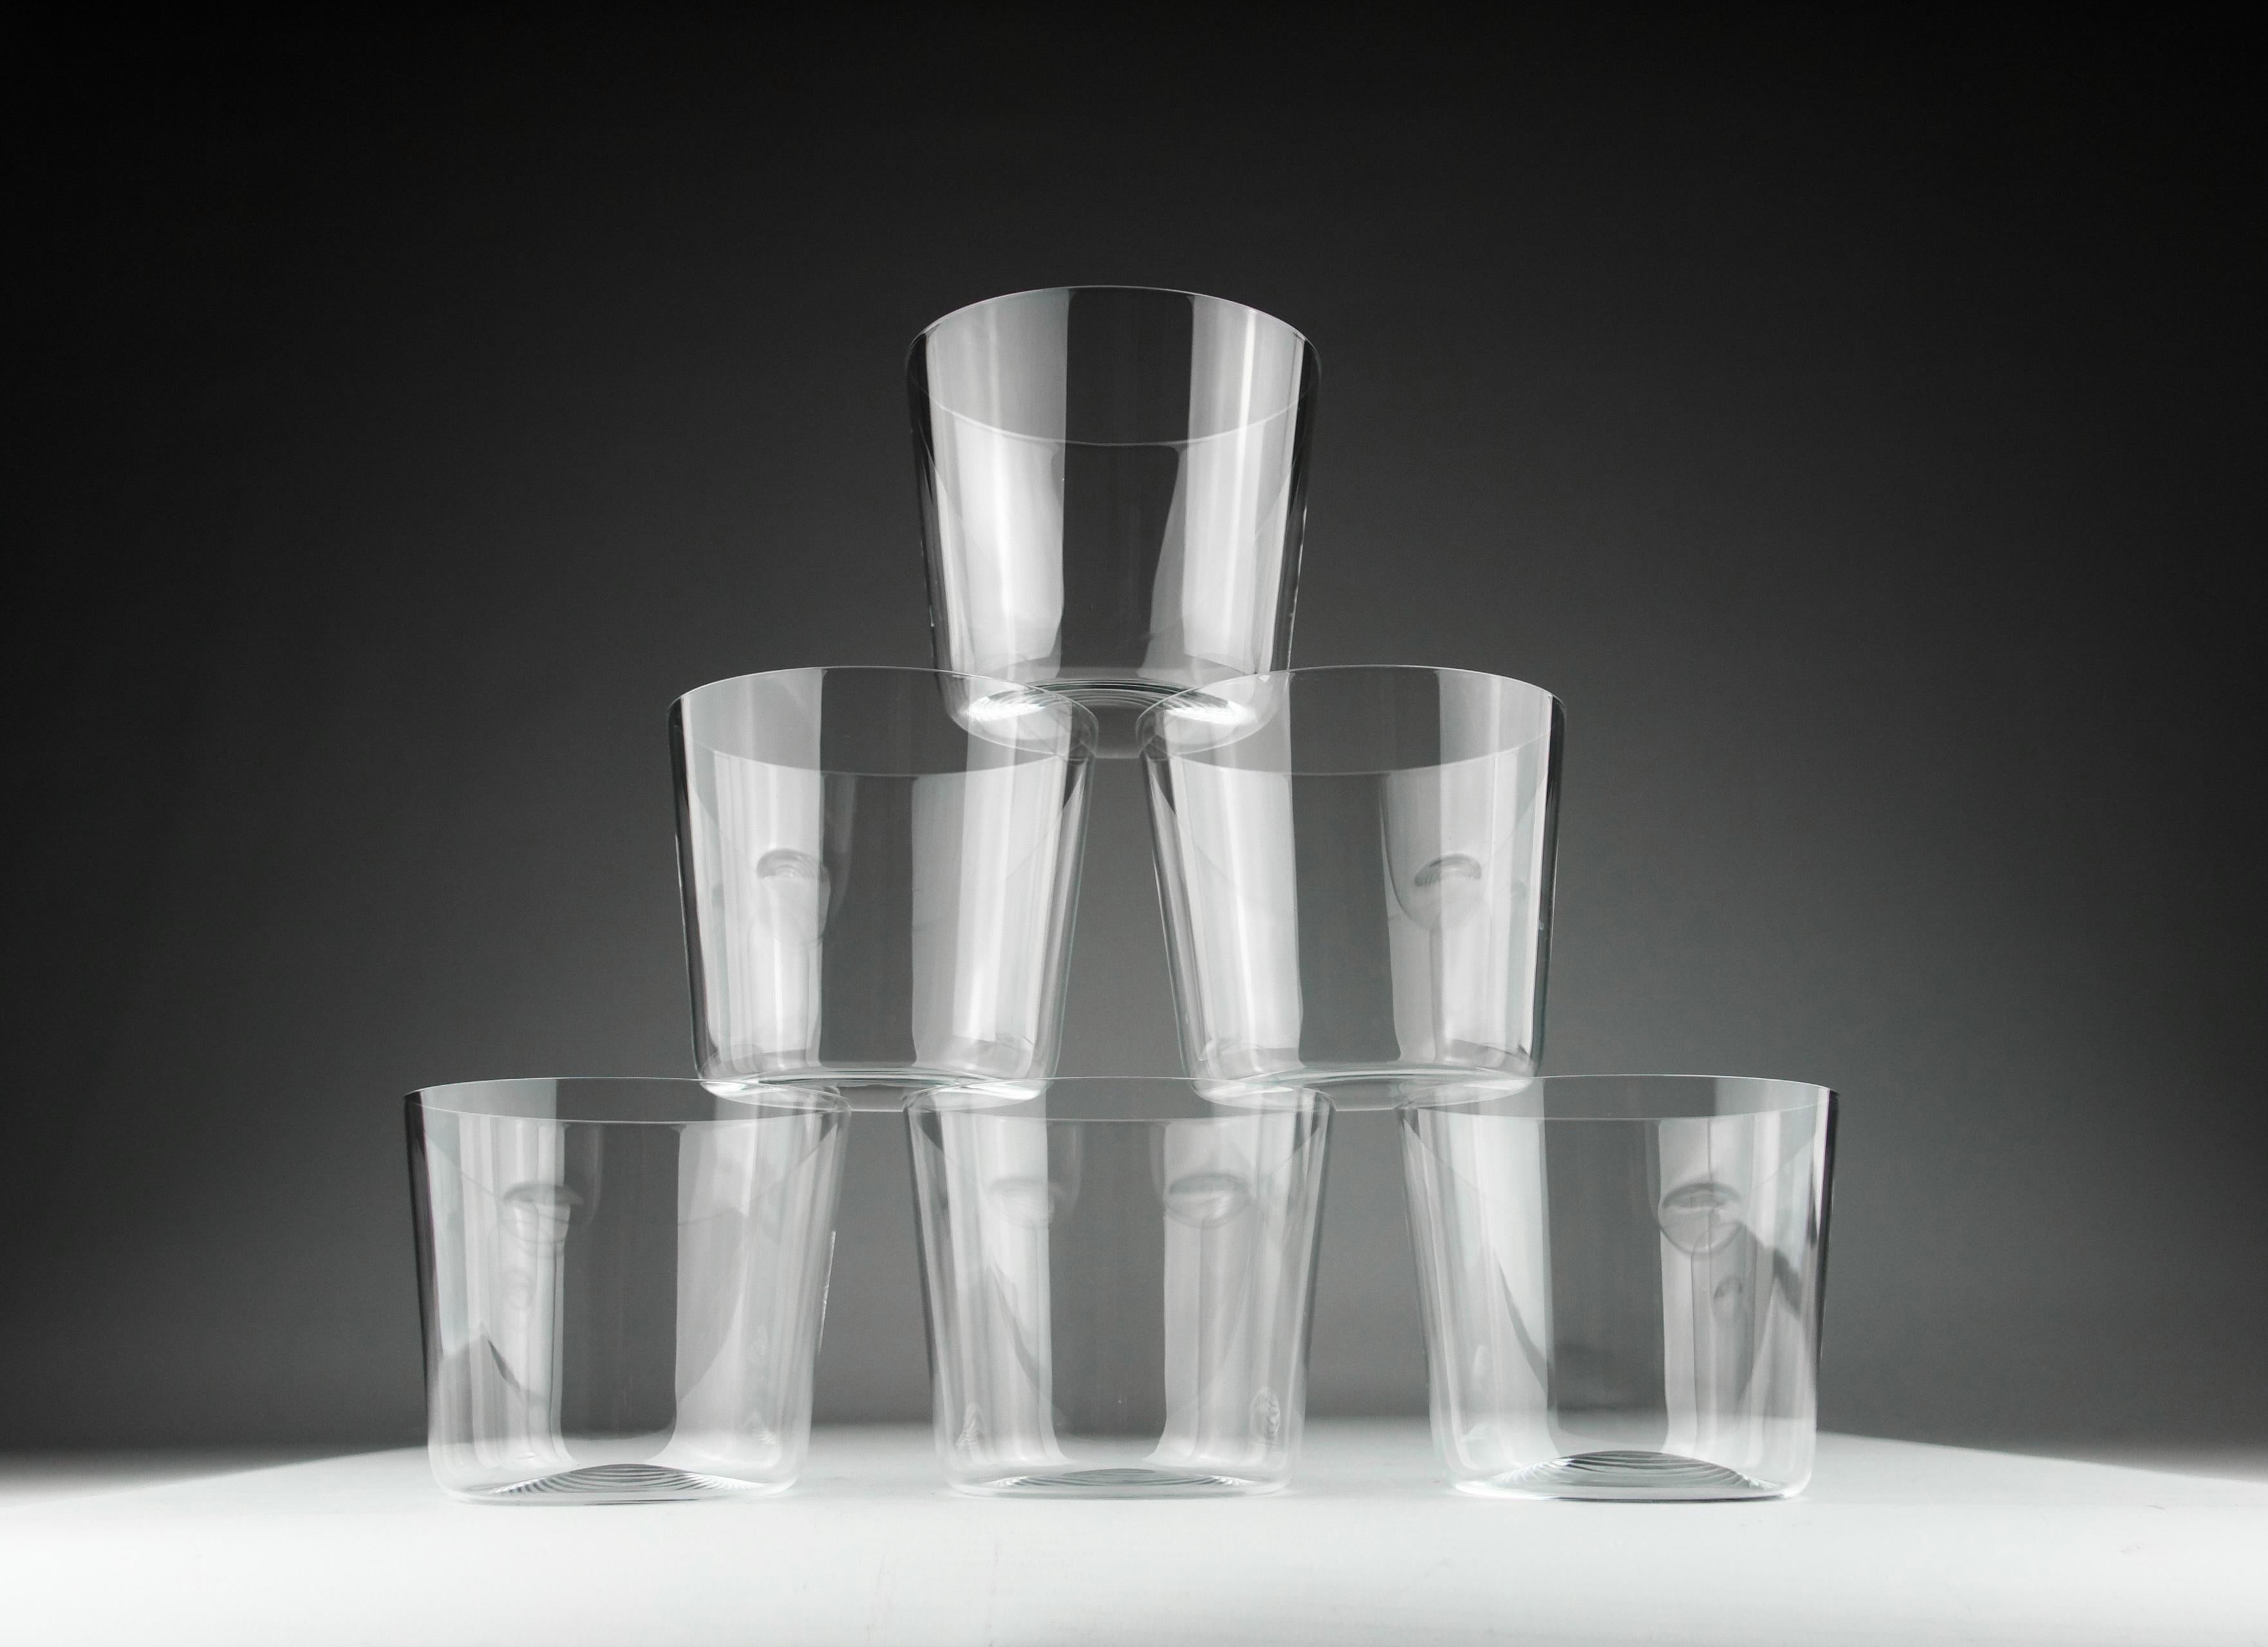 Six beautifully thin Sawaya & Moroni crystal water glasses, Italy circa 2000. In their original box, with reinforced padding.

Dimensions in cm ( H x D ) : 8.2 x 9.3

Secure shipping.

